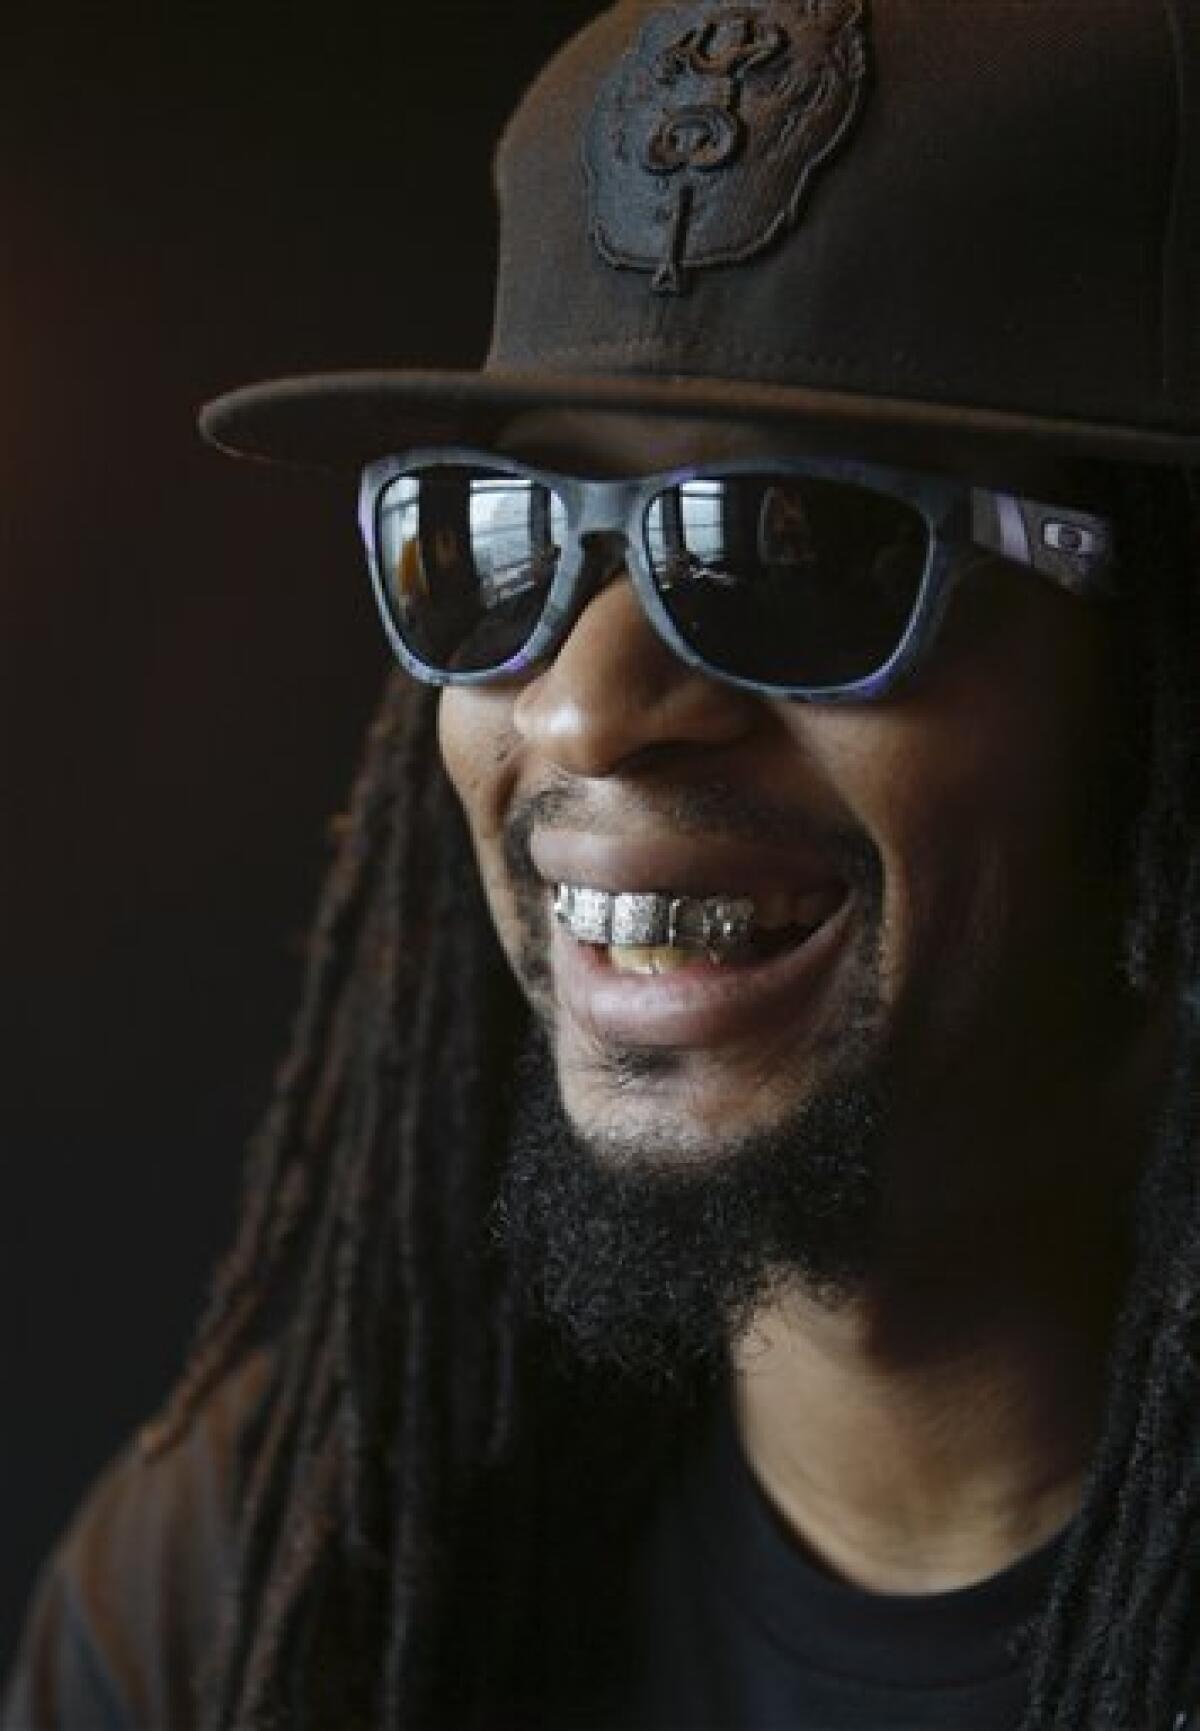 Rapper Lil Jon sets out to complete new album - The San Diego